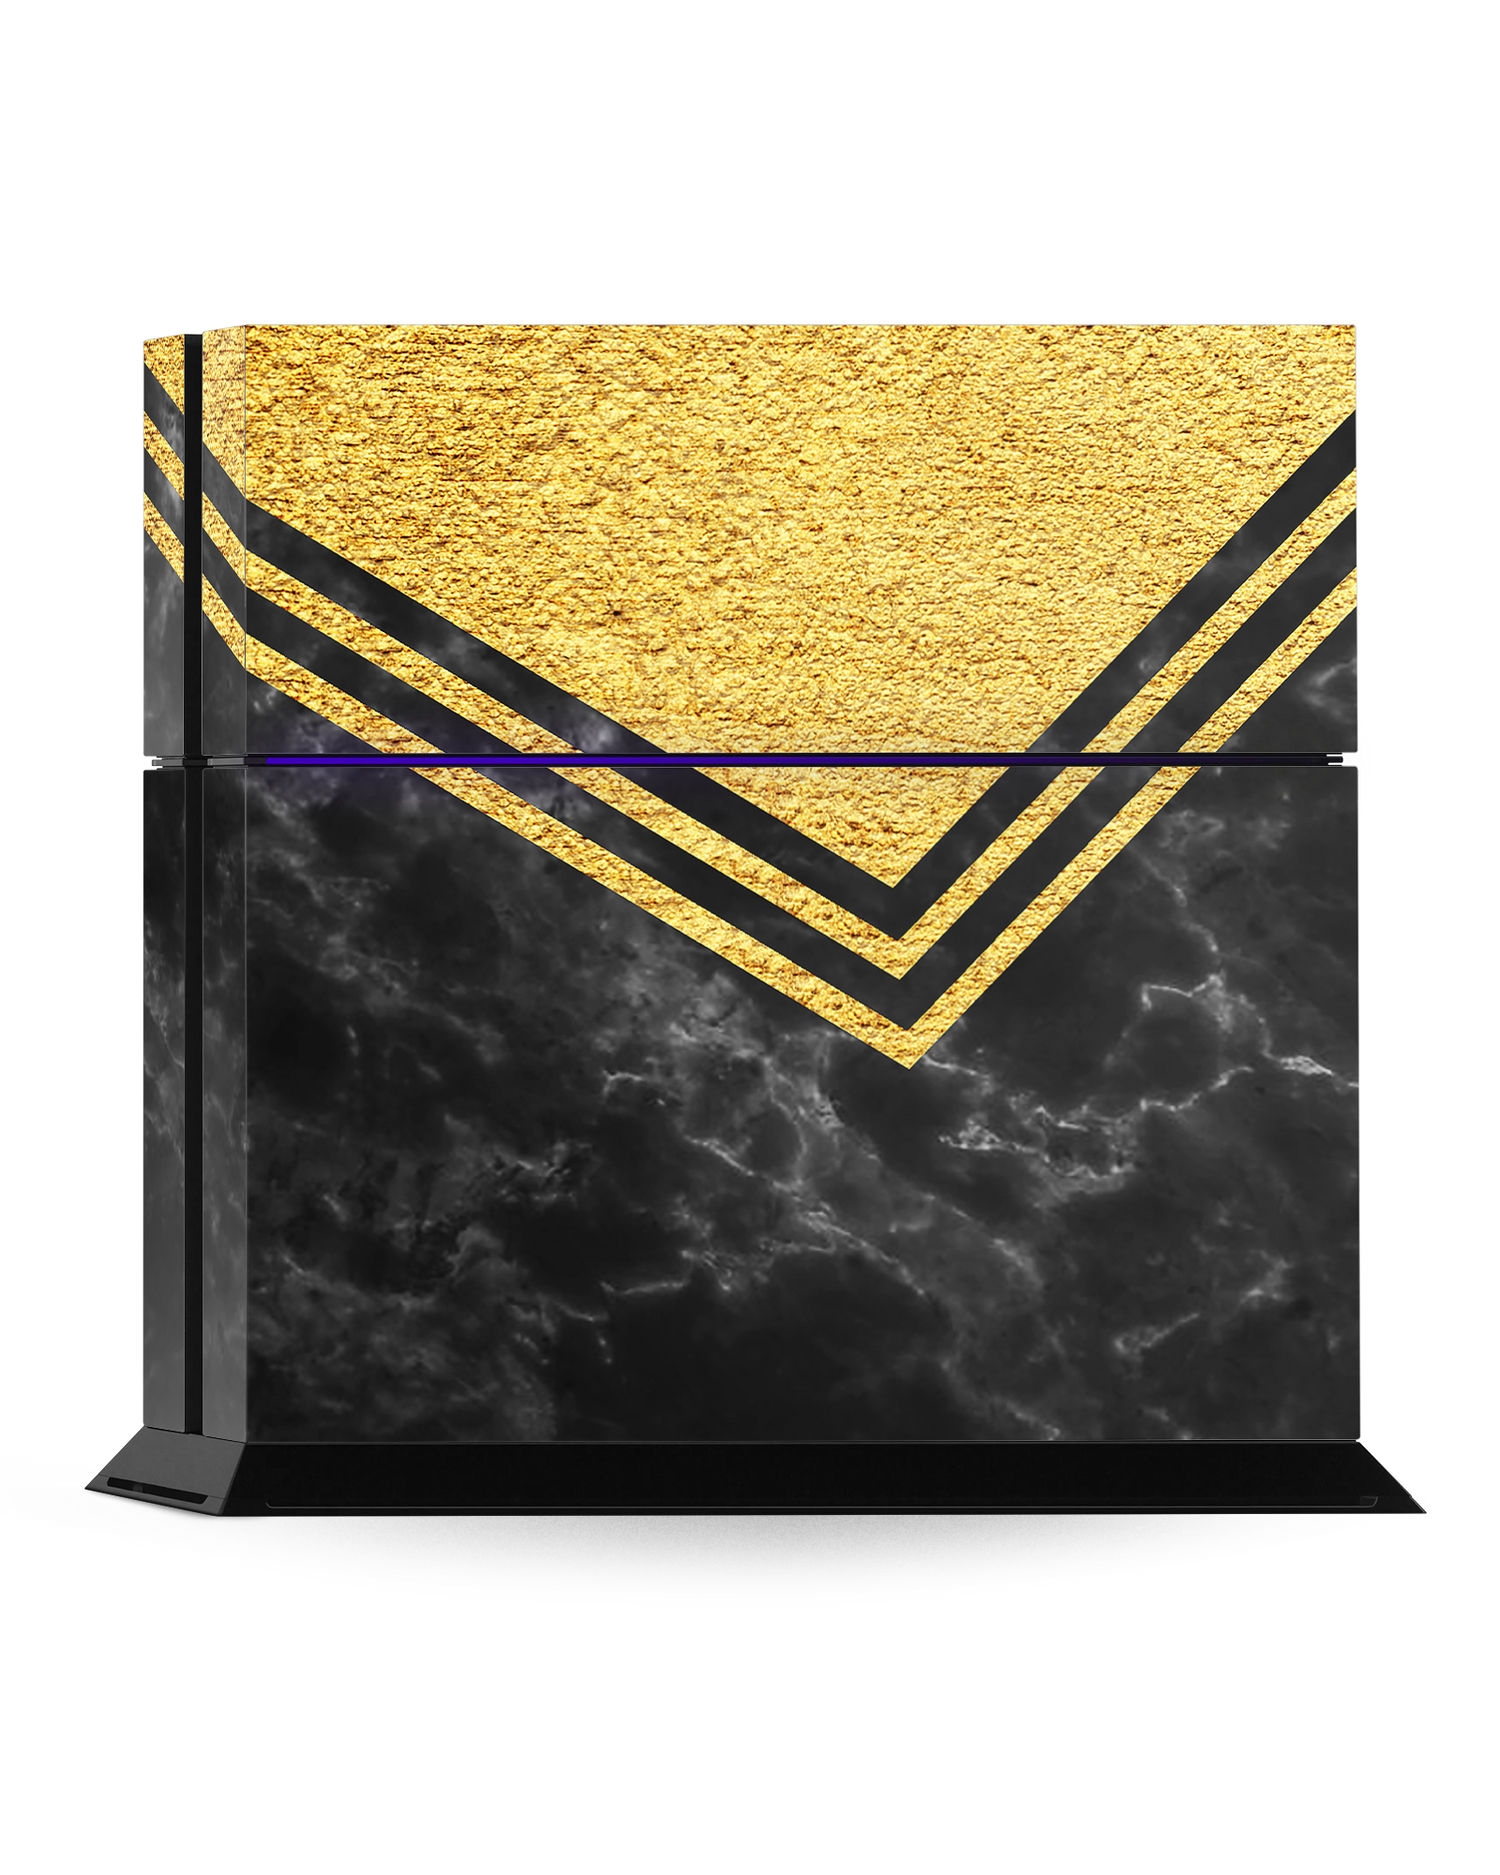 Gold Marble Console Skin for Sony PlayStation 4: Standing